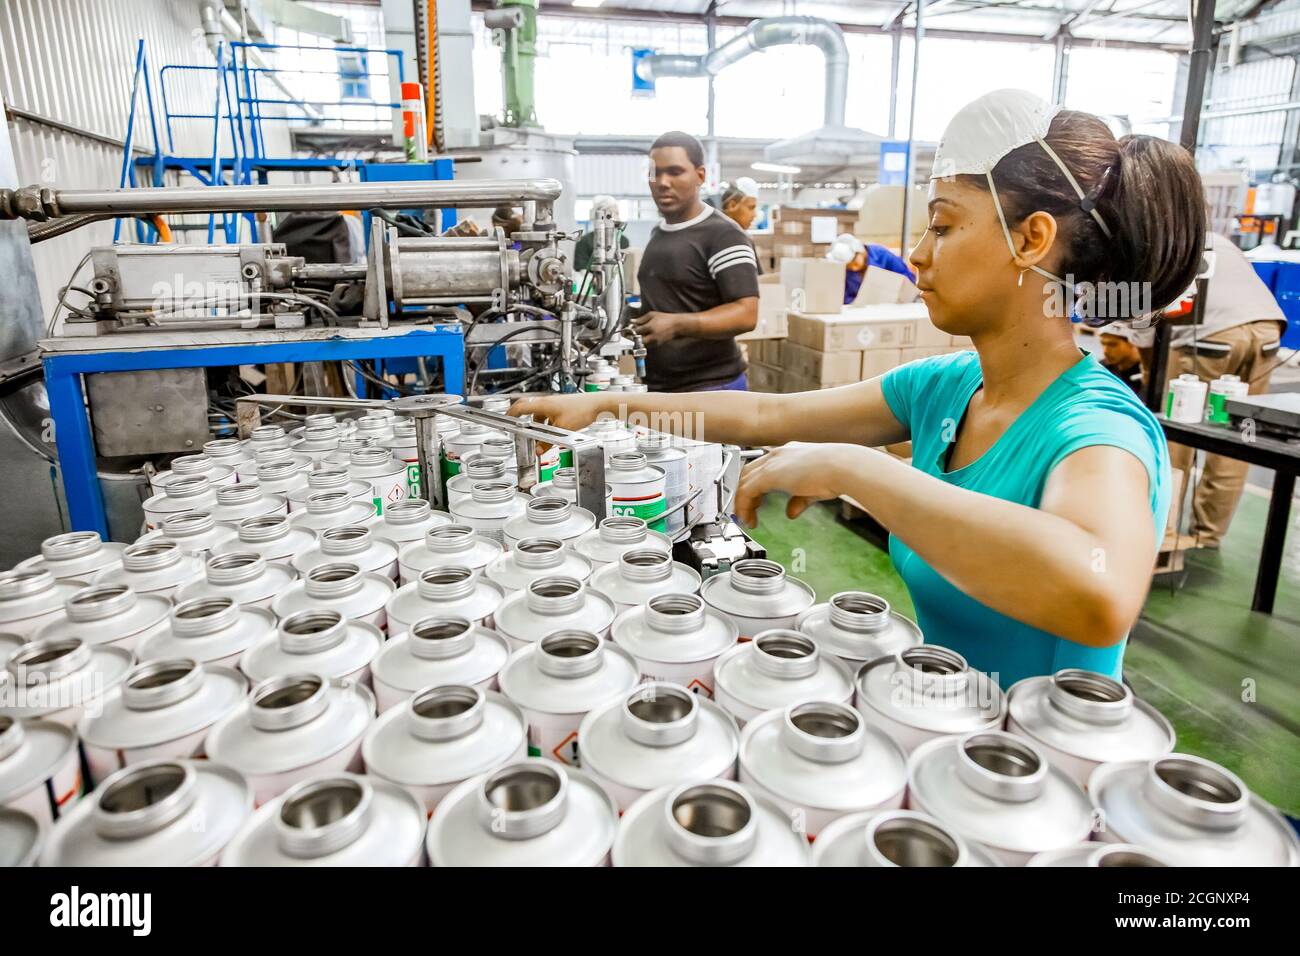 Johannesburg, South Africa - October 19, 2012: Diverse people working on an  assembly line in a glue factory Stock Photo - Alamy